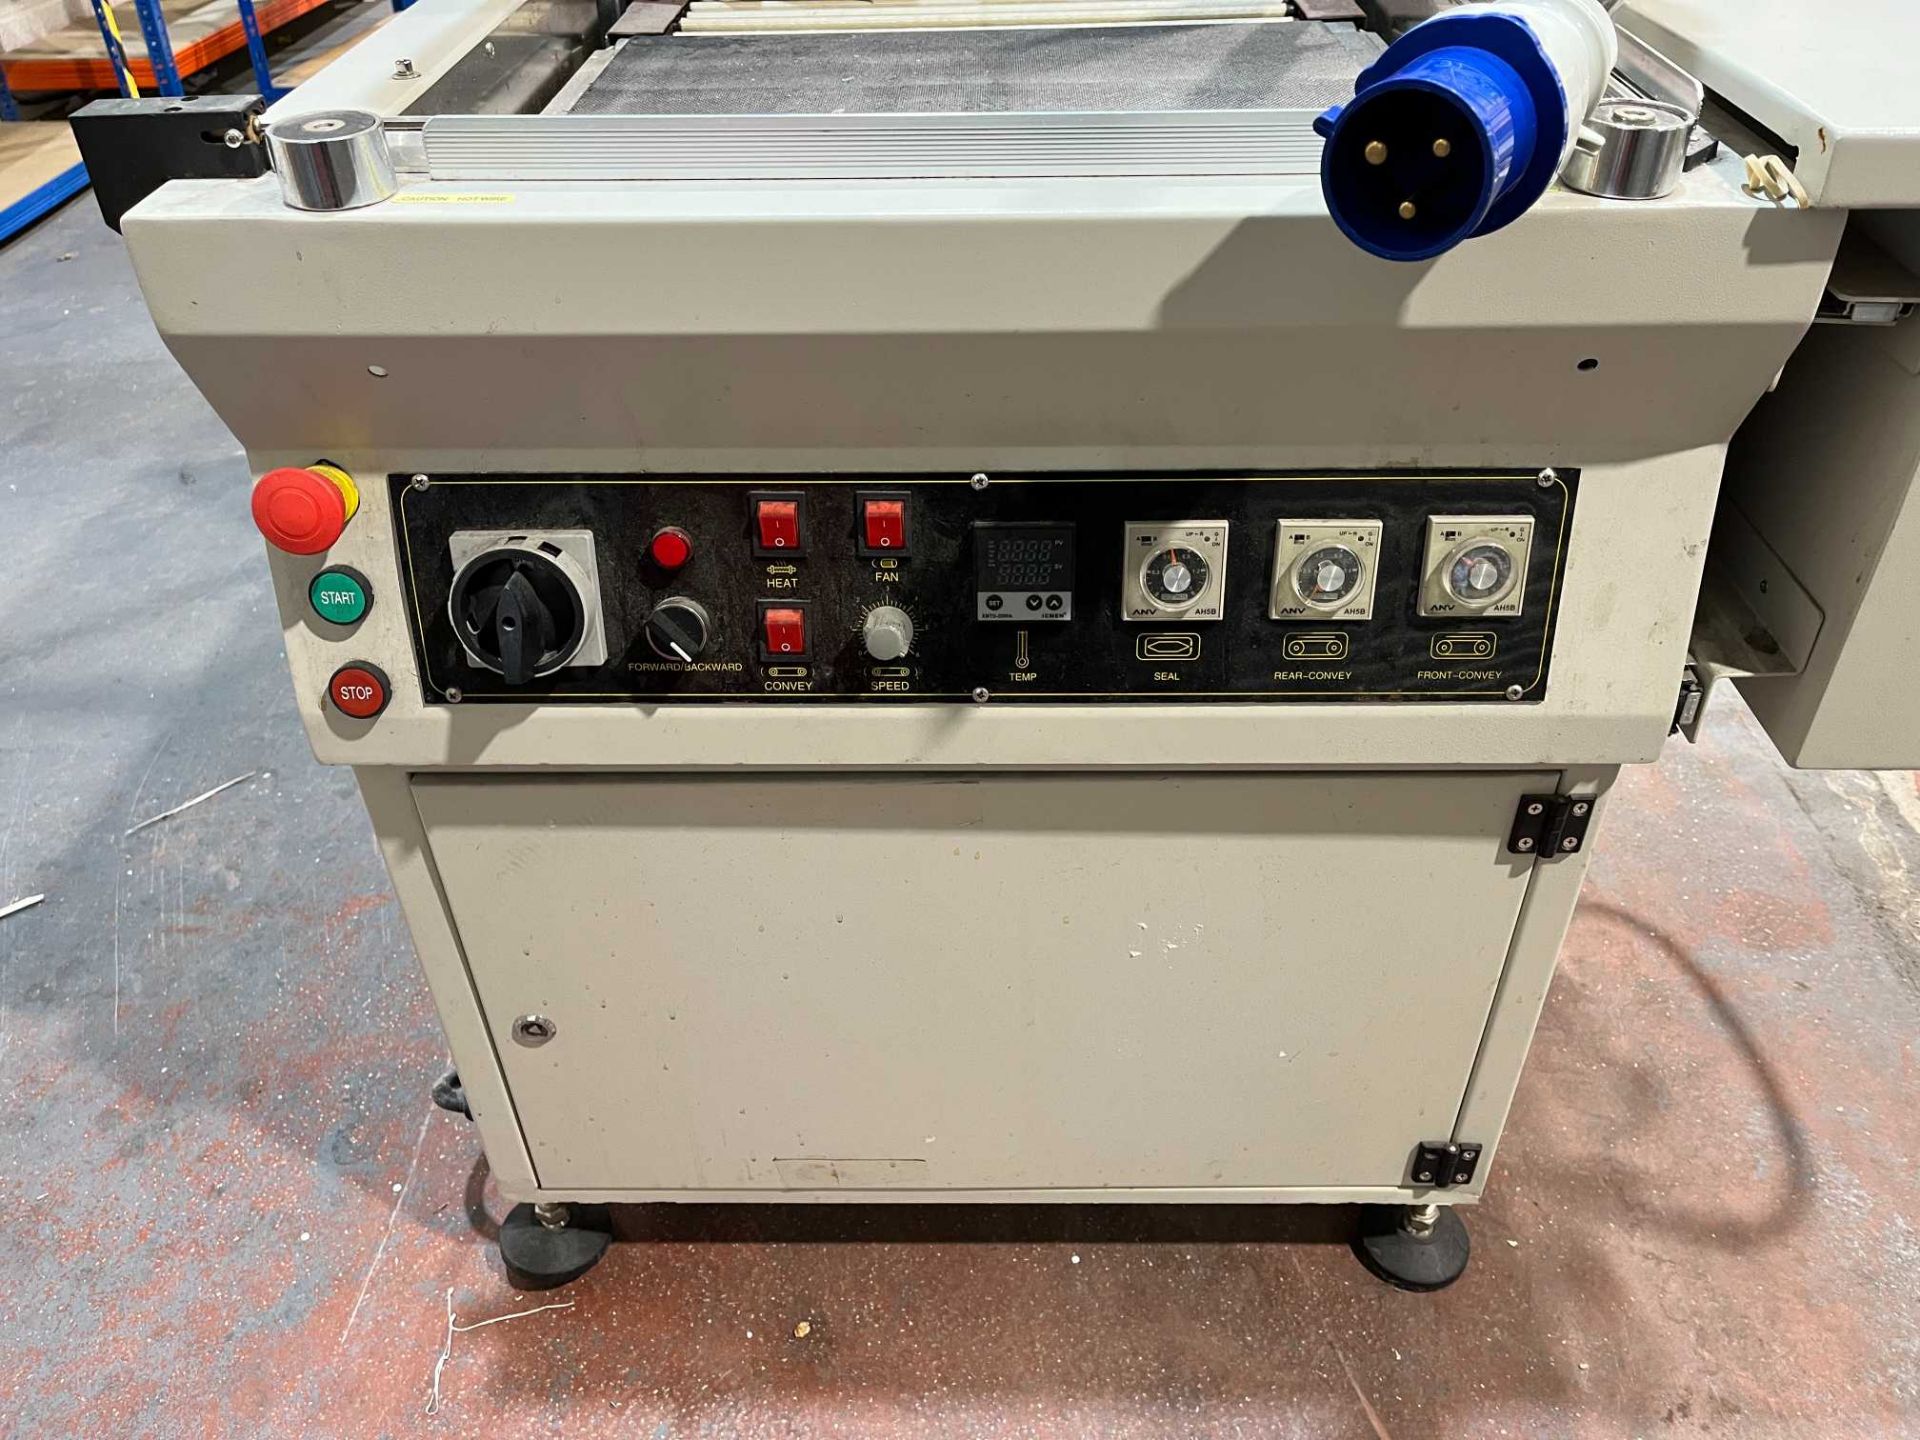 Hualian Compact Seal shrink packaging machine; Serial No: 1656119050101 (2019) - Image 2 of 4